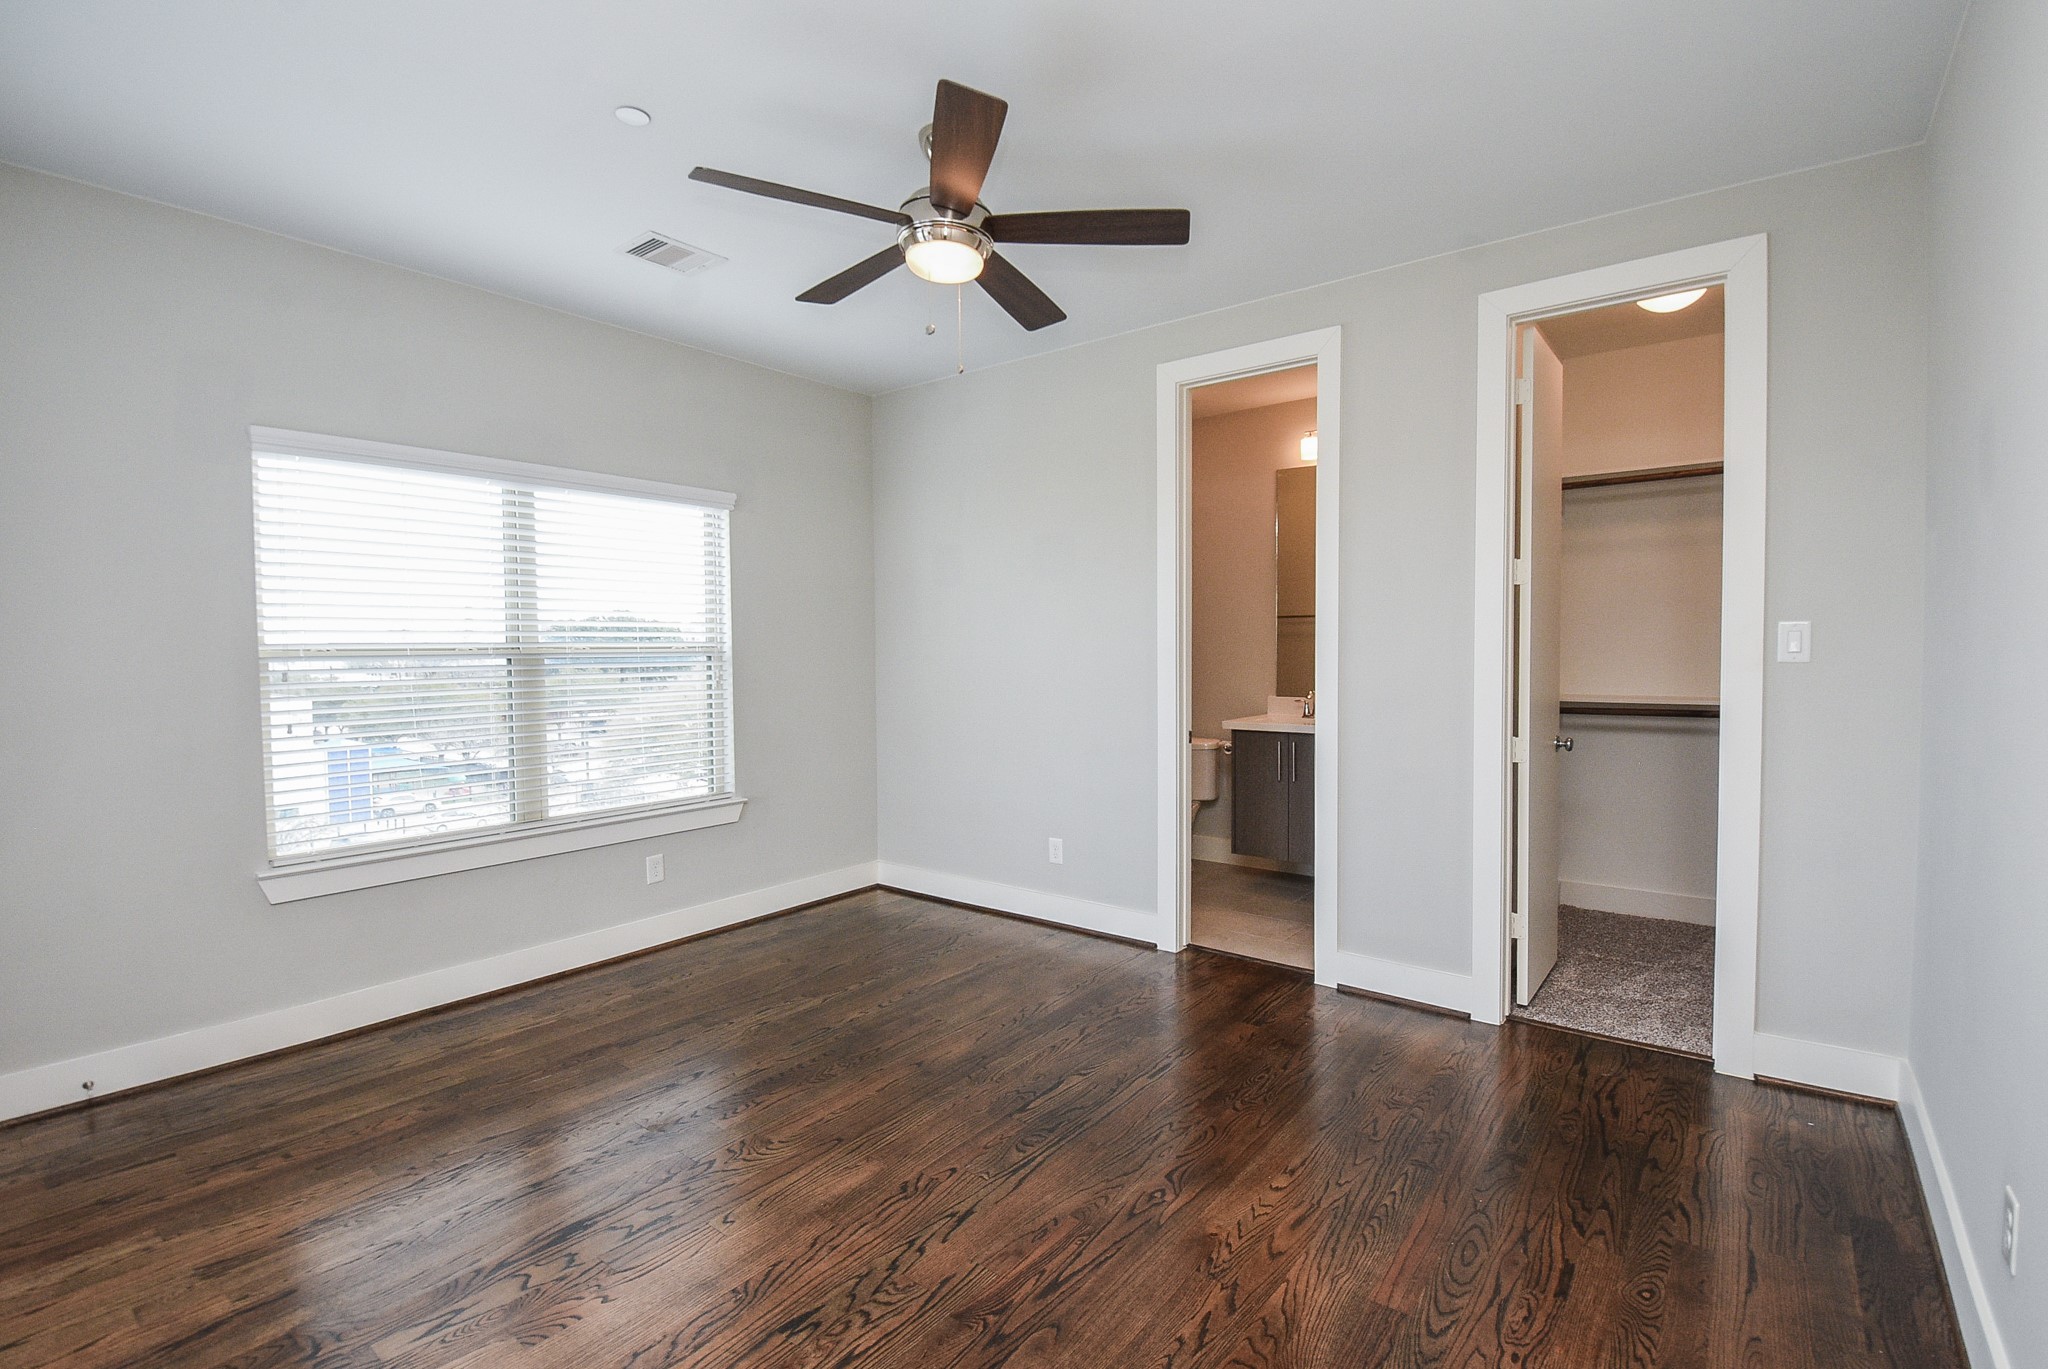 Your handy utility area located on the second floor is nicely placed behind double doors, with good storage, washer and dryer to remain with home.